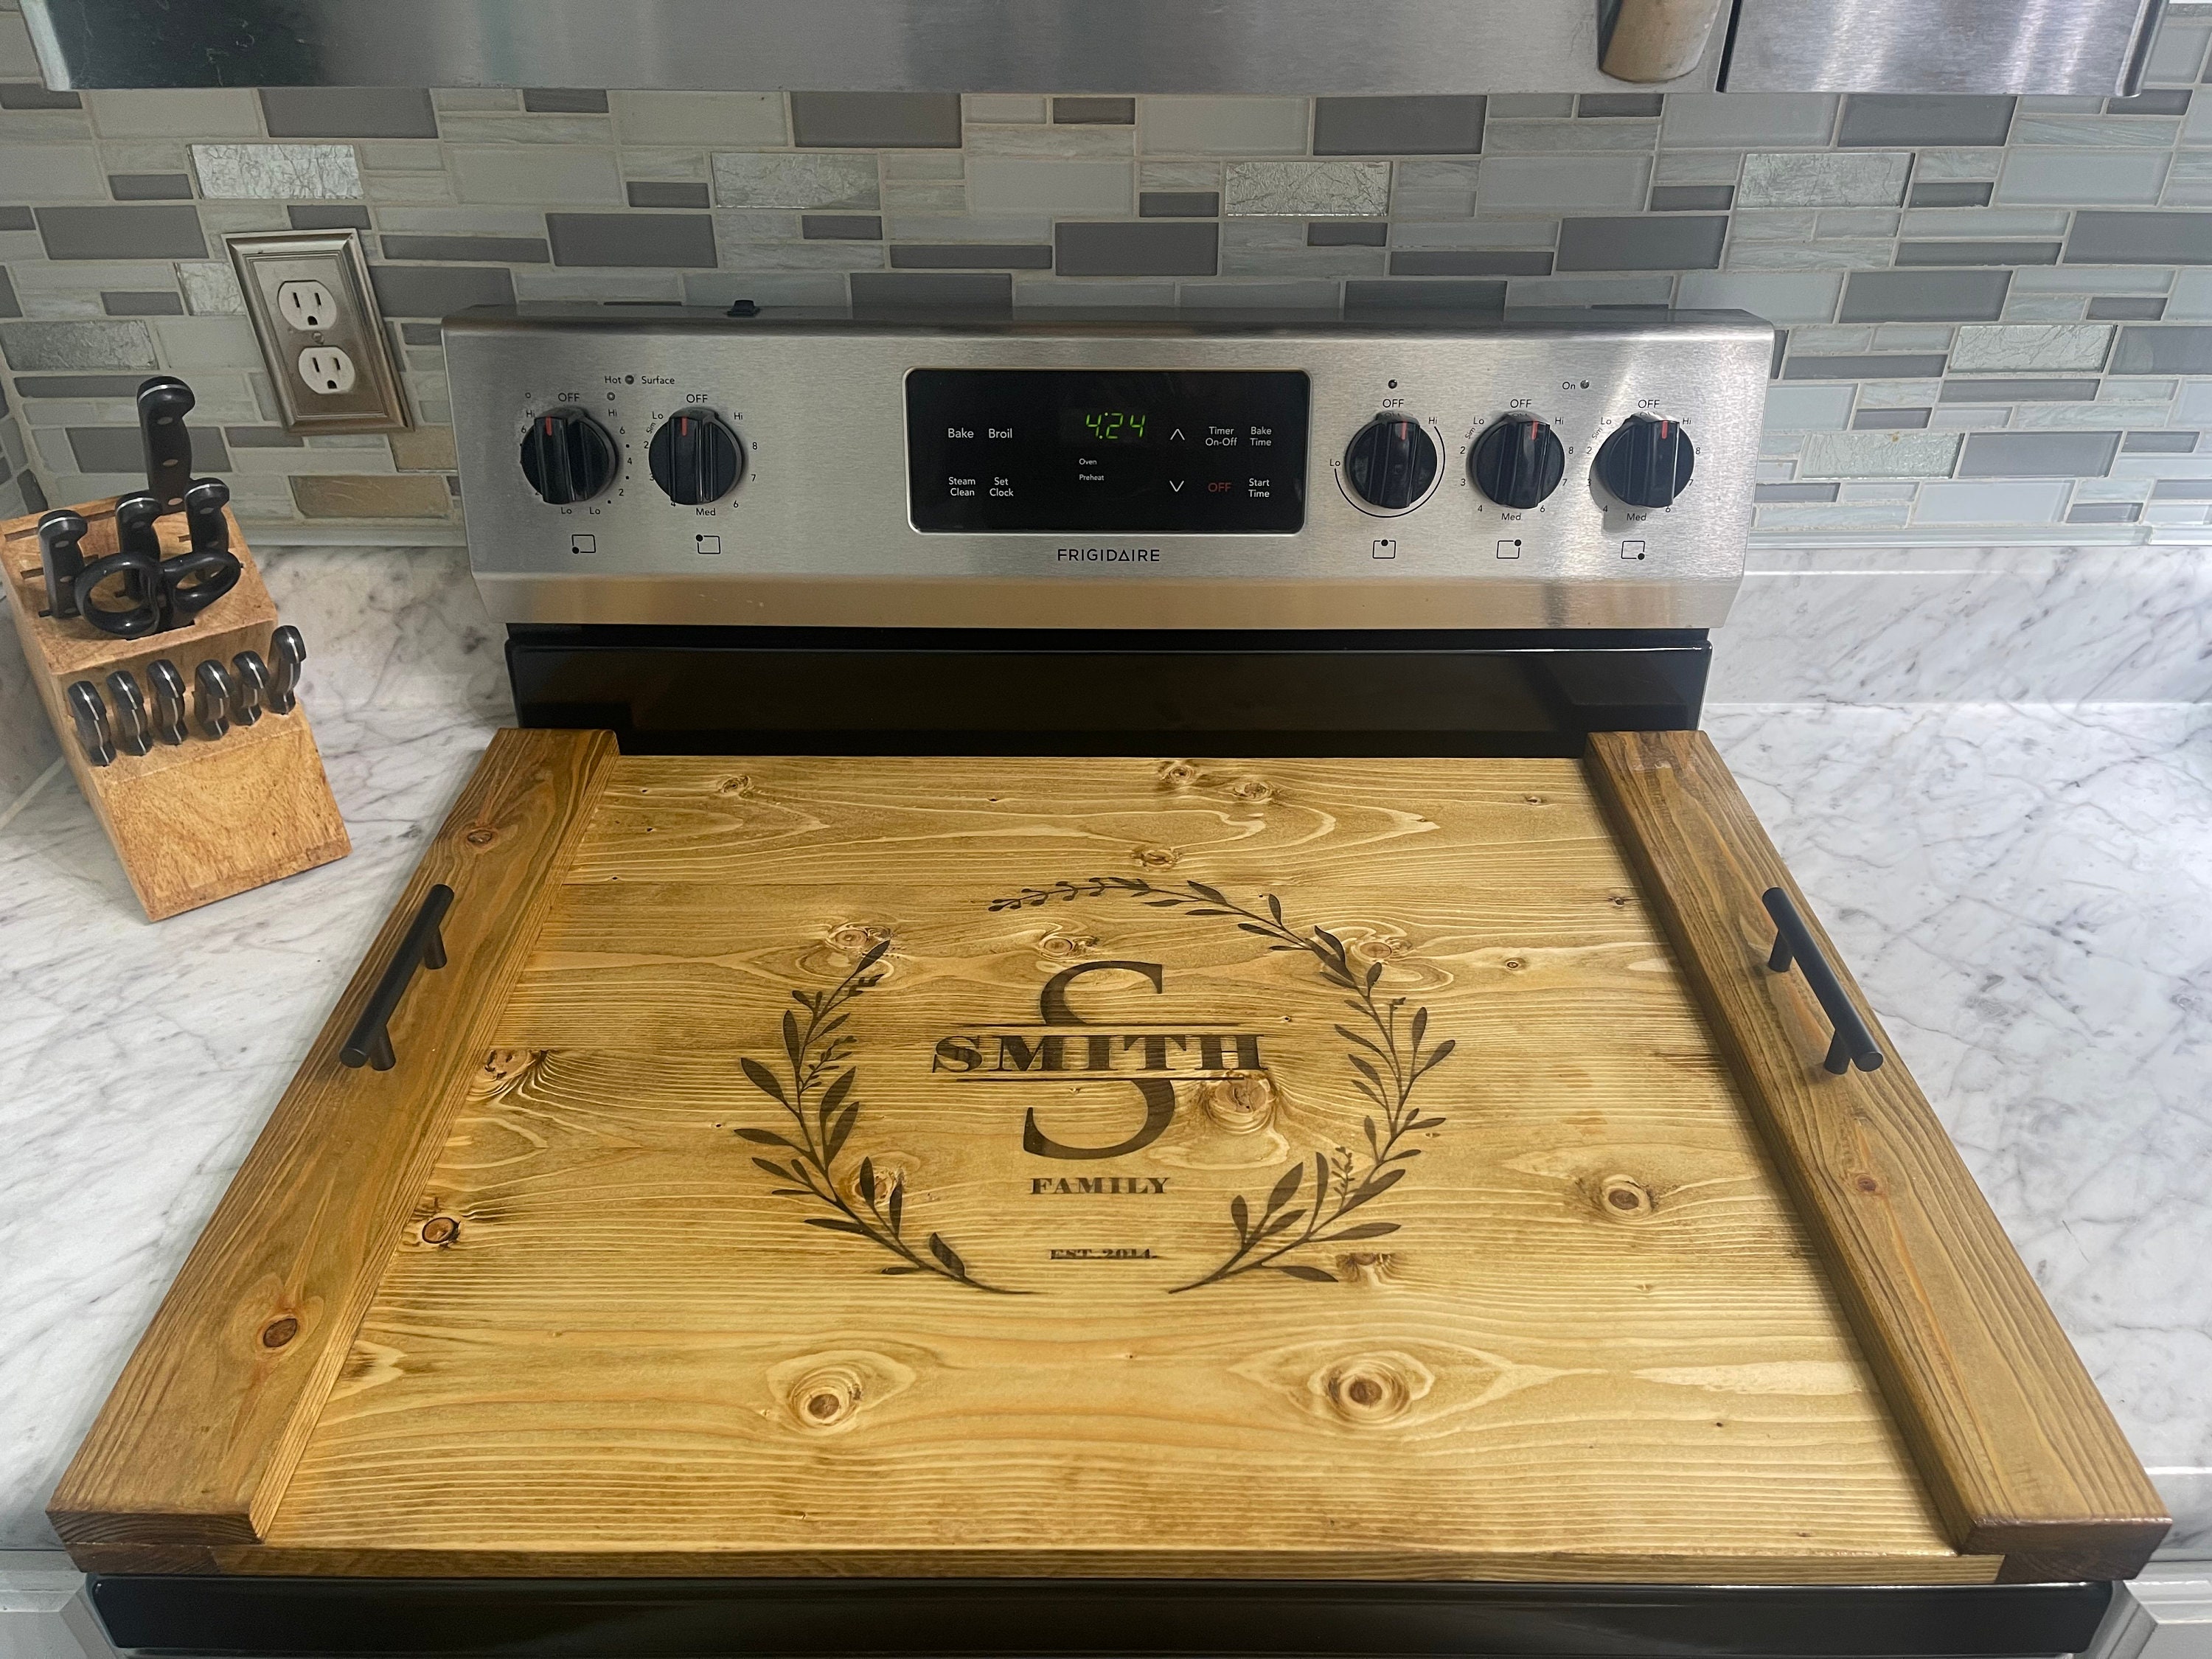  Noodle Board Stove Covers with Handles (30x22 inches, Solid  Pine) Noodle Board Stove Cover for Electric and Gas Stove, Sink Cover RV  Stove Top Cover : Appliances